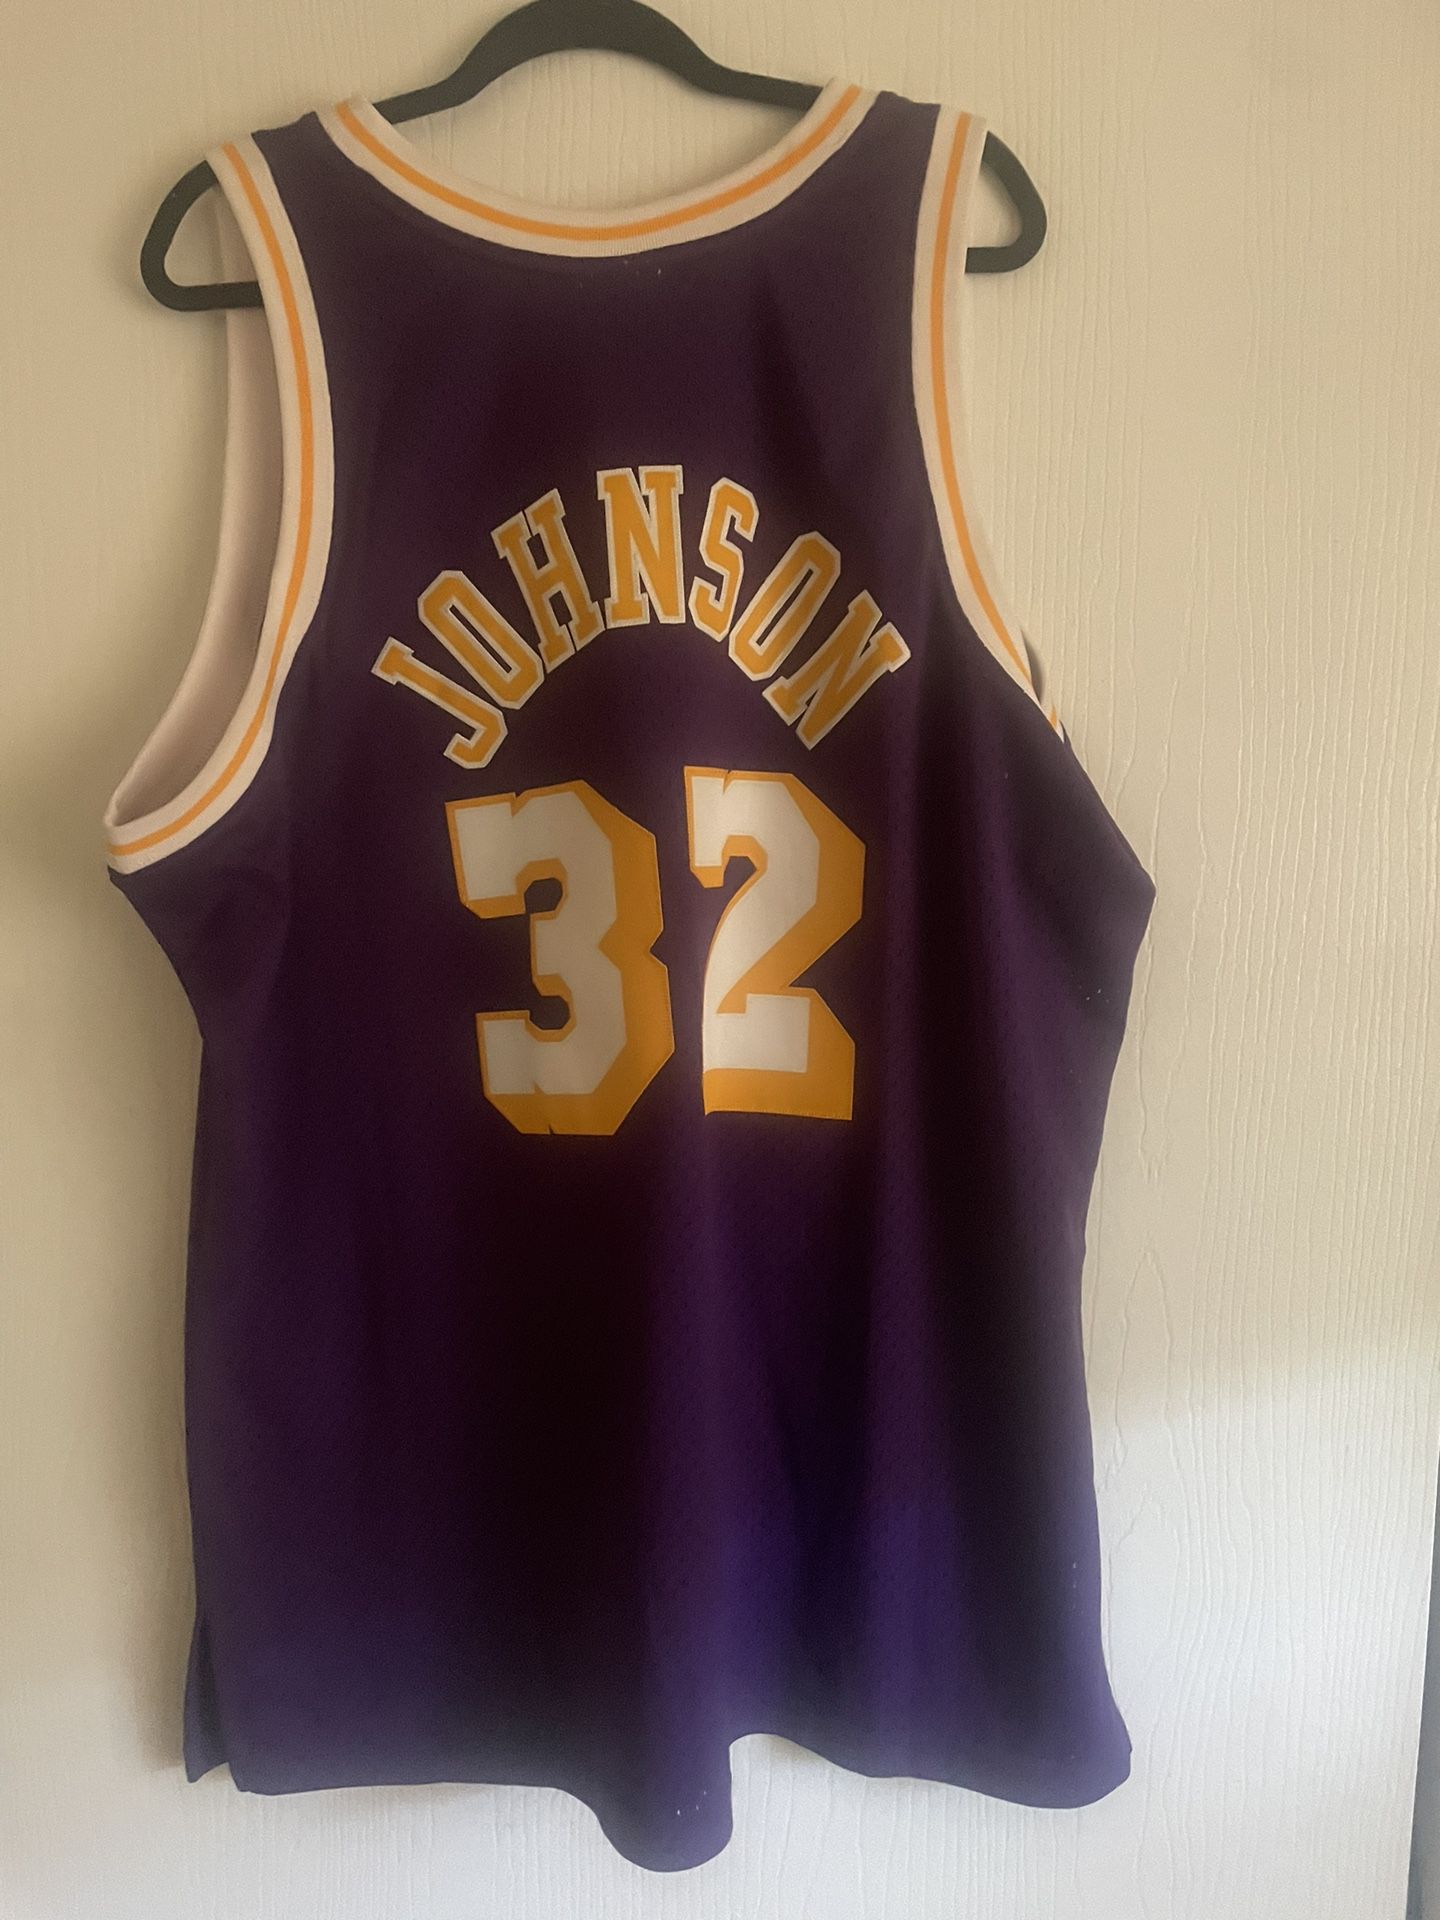 How To Spot a FAKE Authentic Mitchell & Ness Throwback Jersey